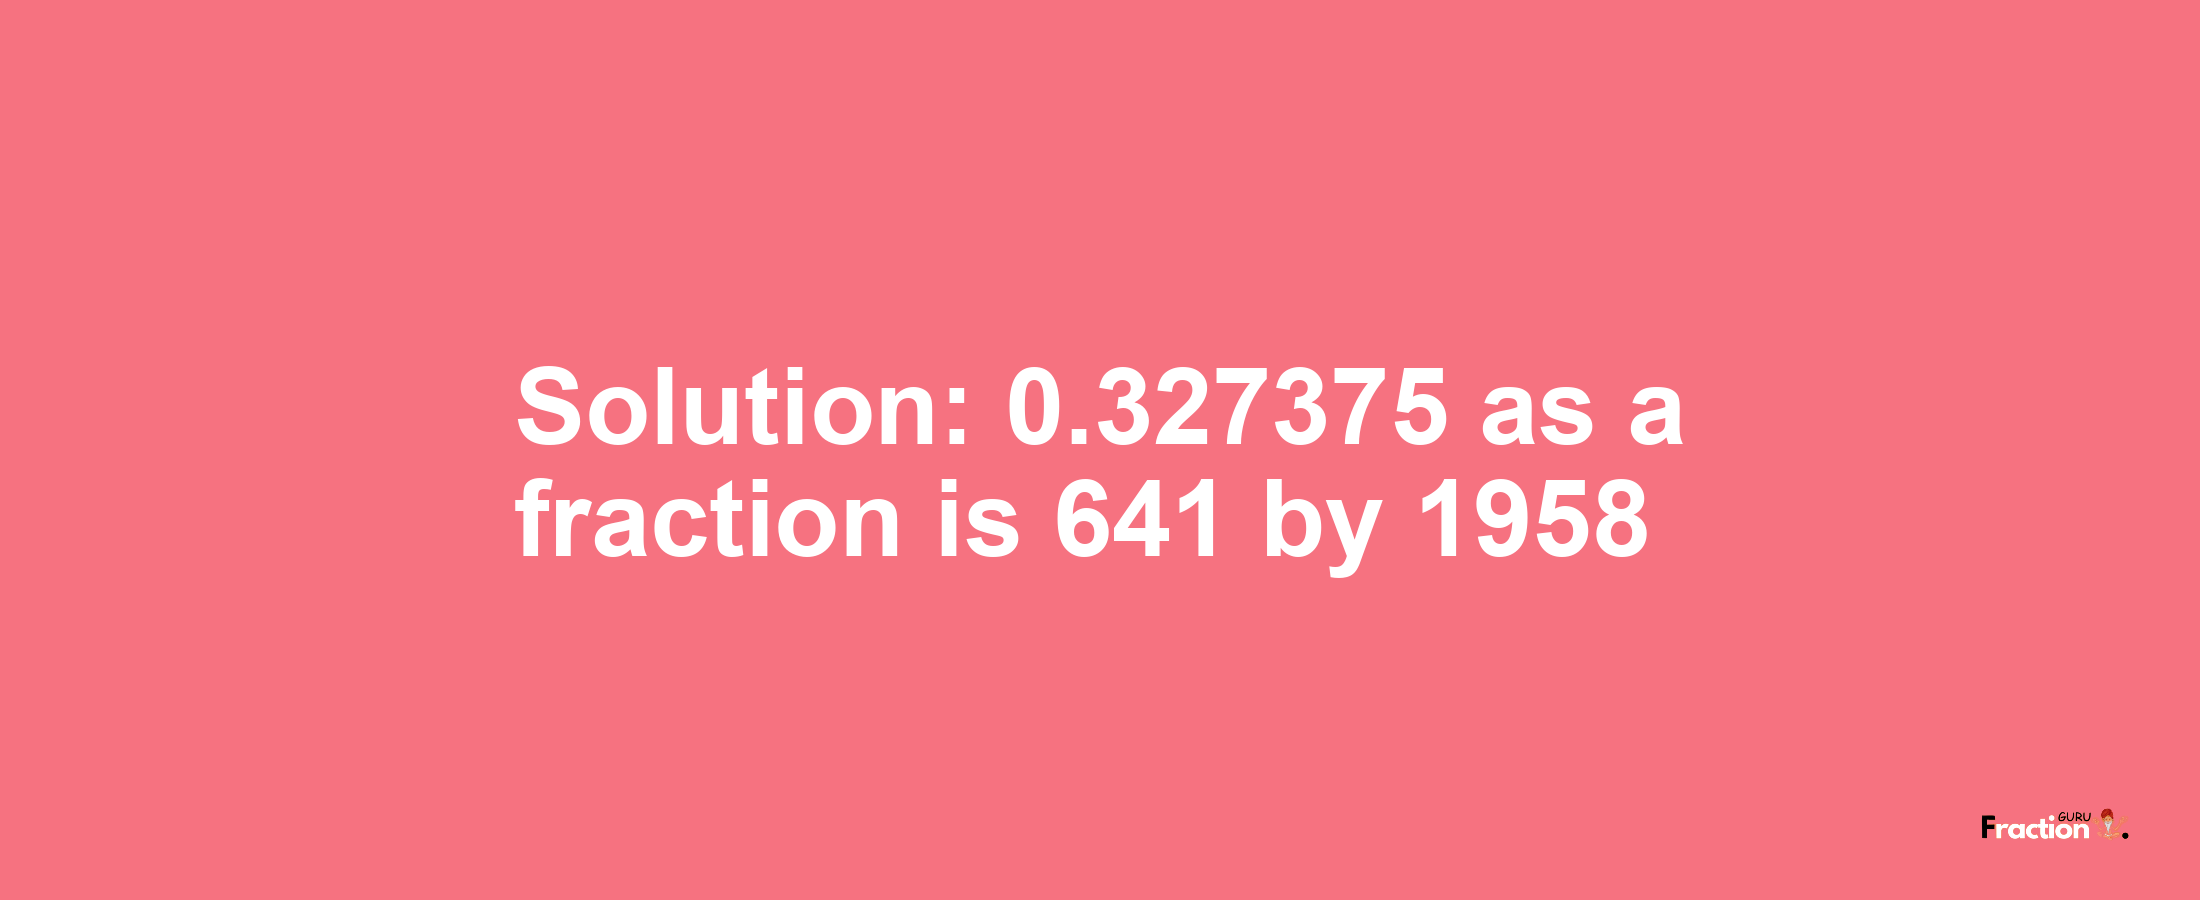 Solution:0.327375 as a fraction is 641/1958